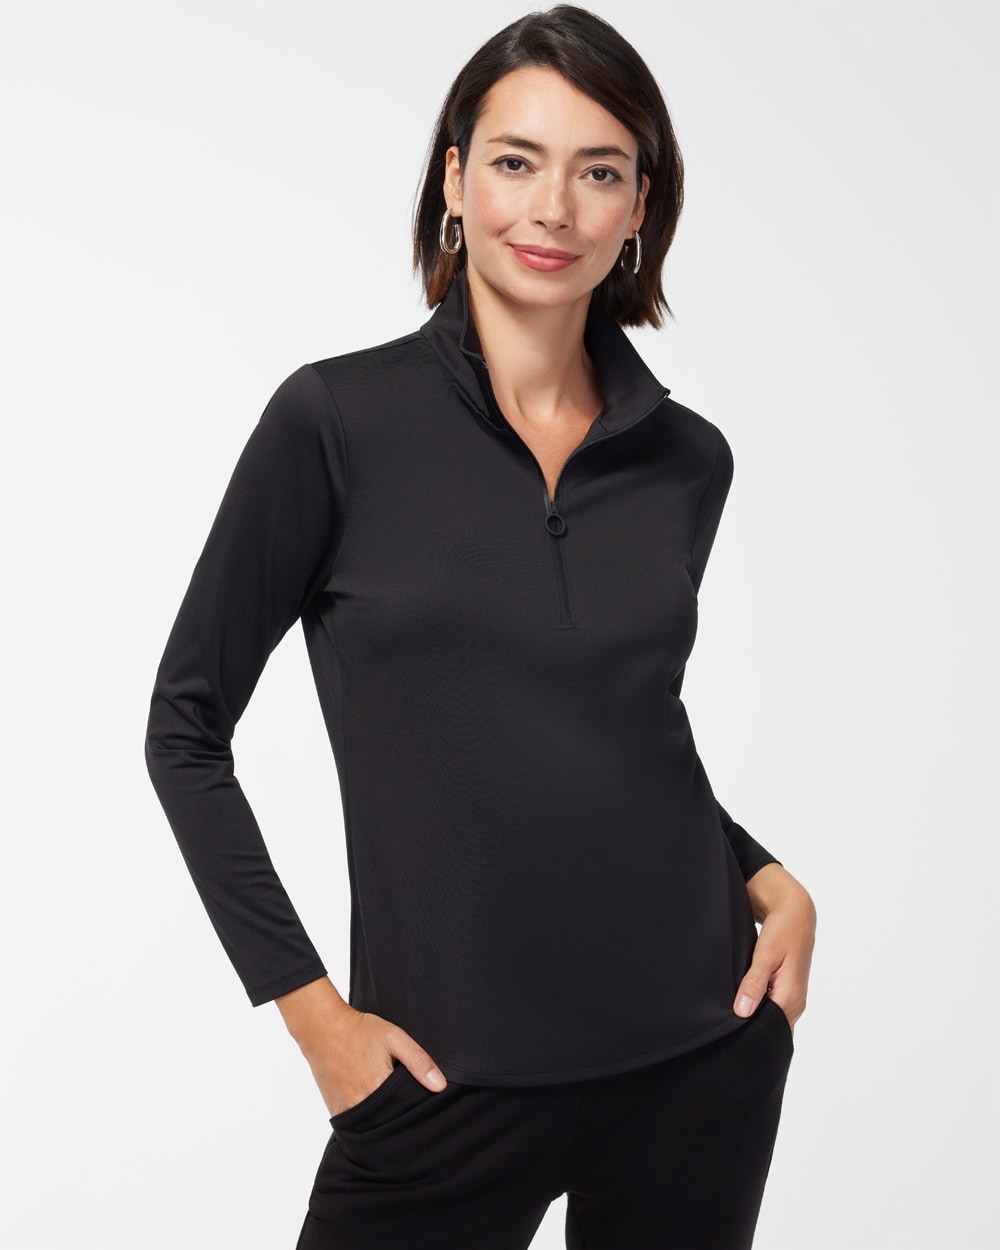 womens wrinkle free travel clothes